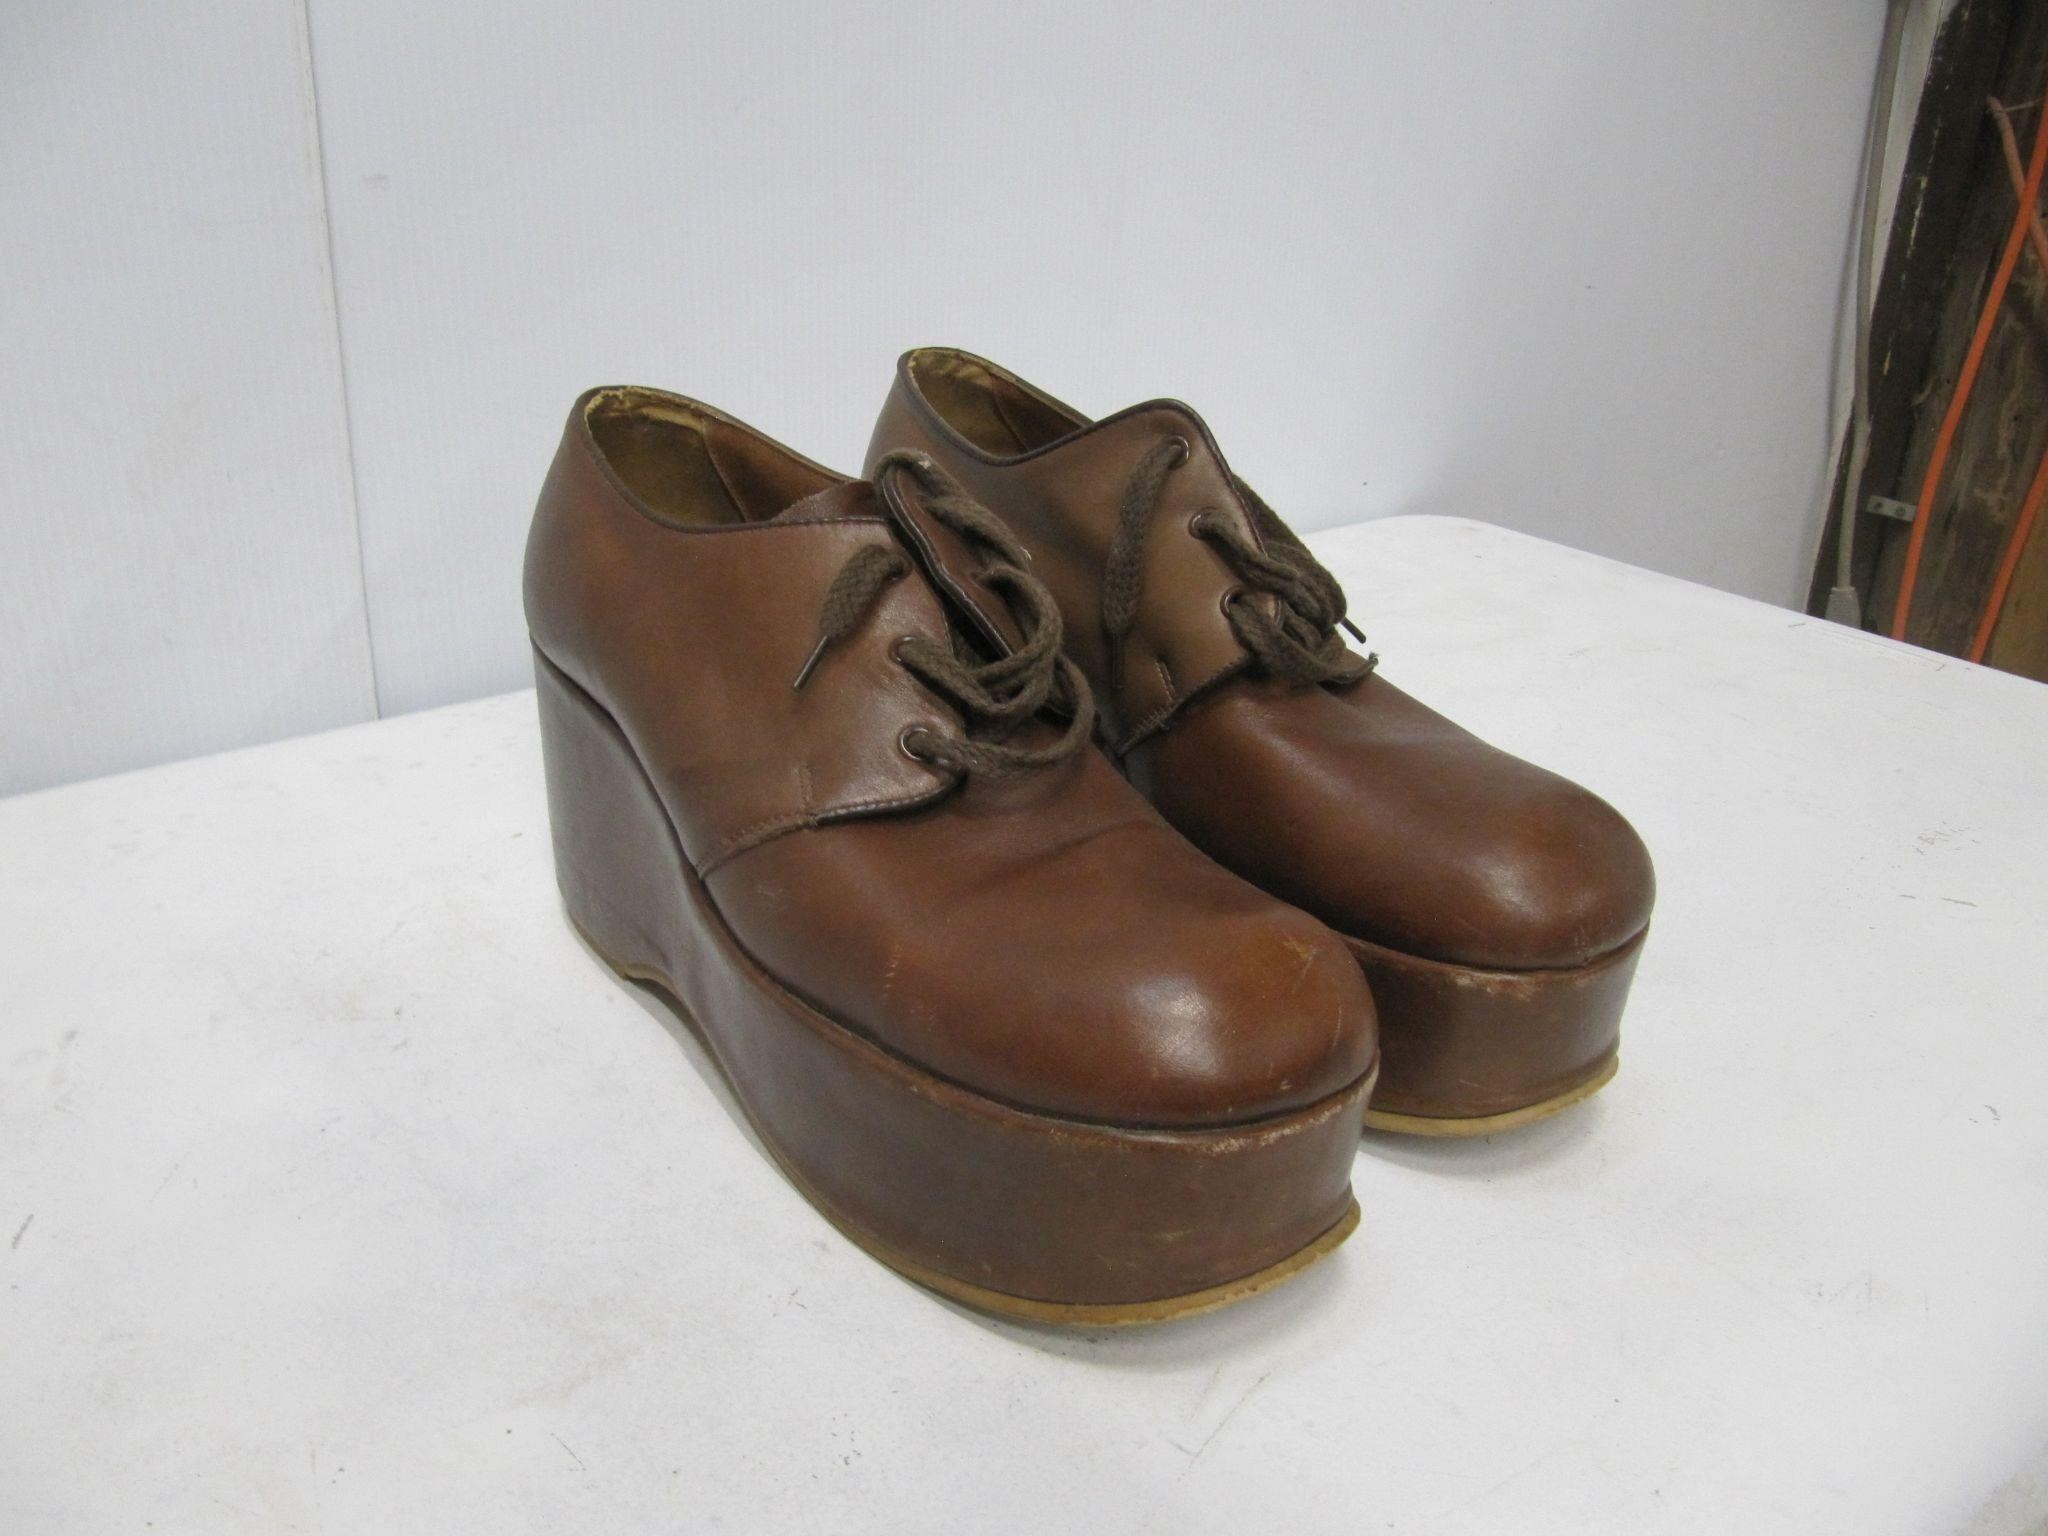 RETRO SEARS "THE SHOE PLACE" WEDGE SHOES